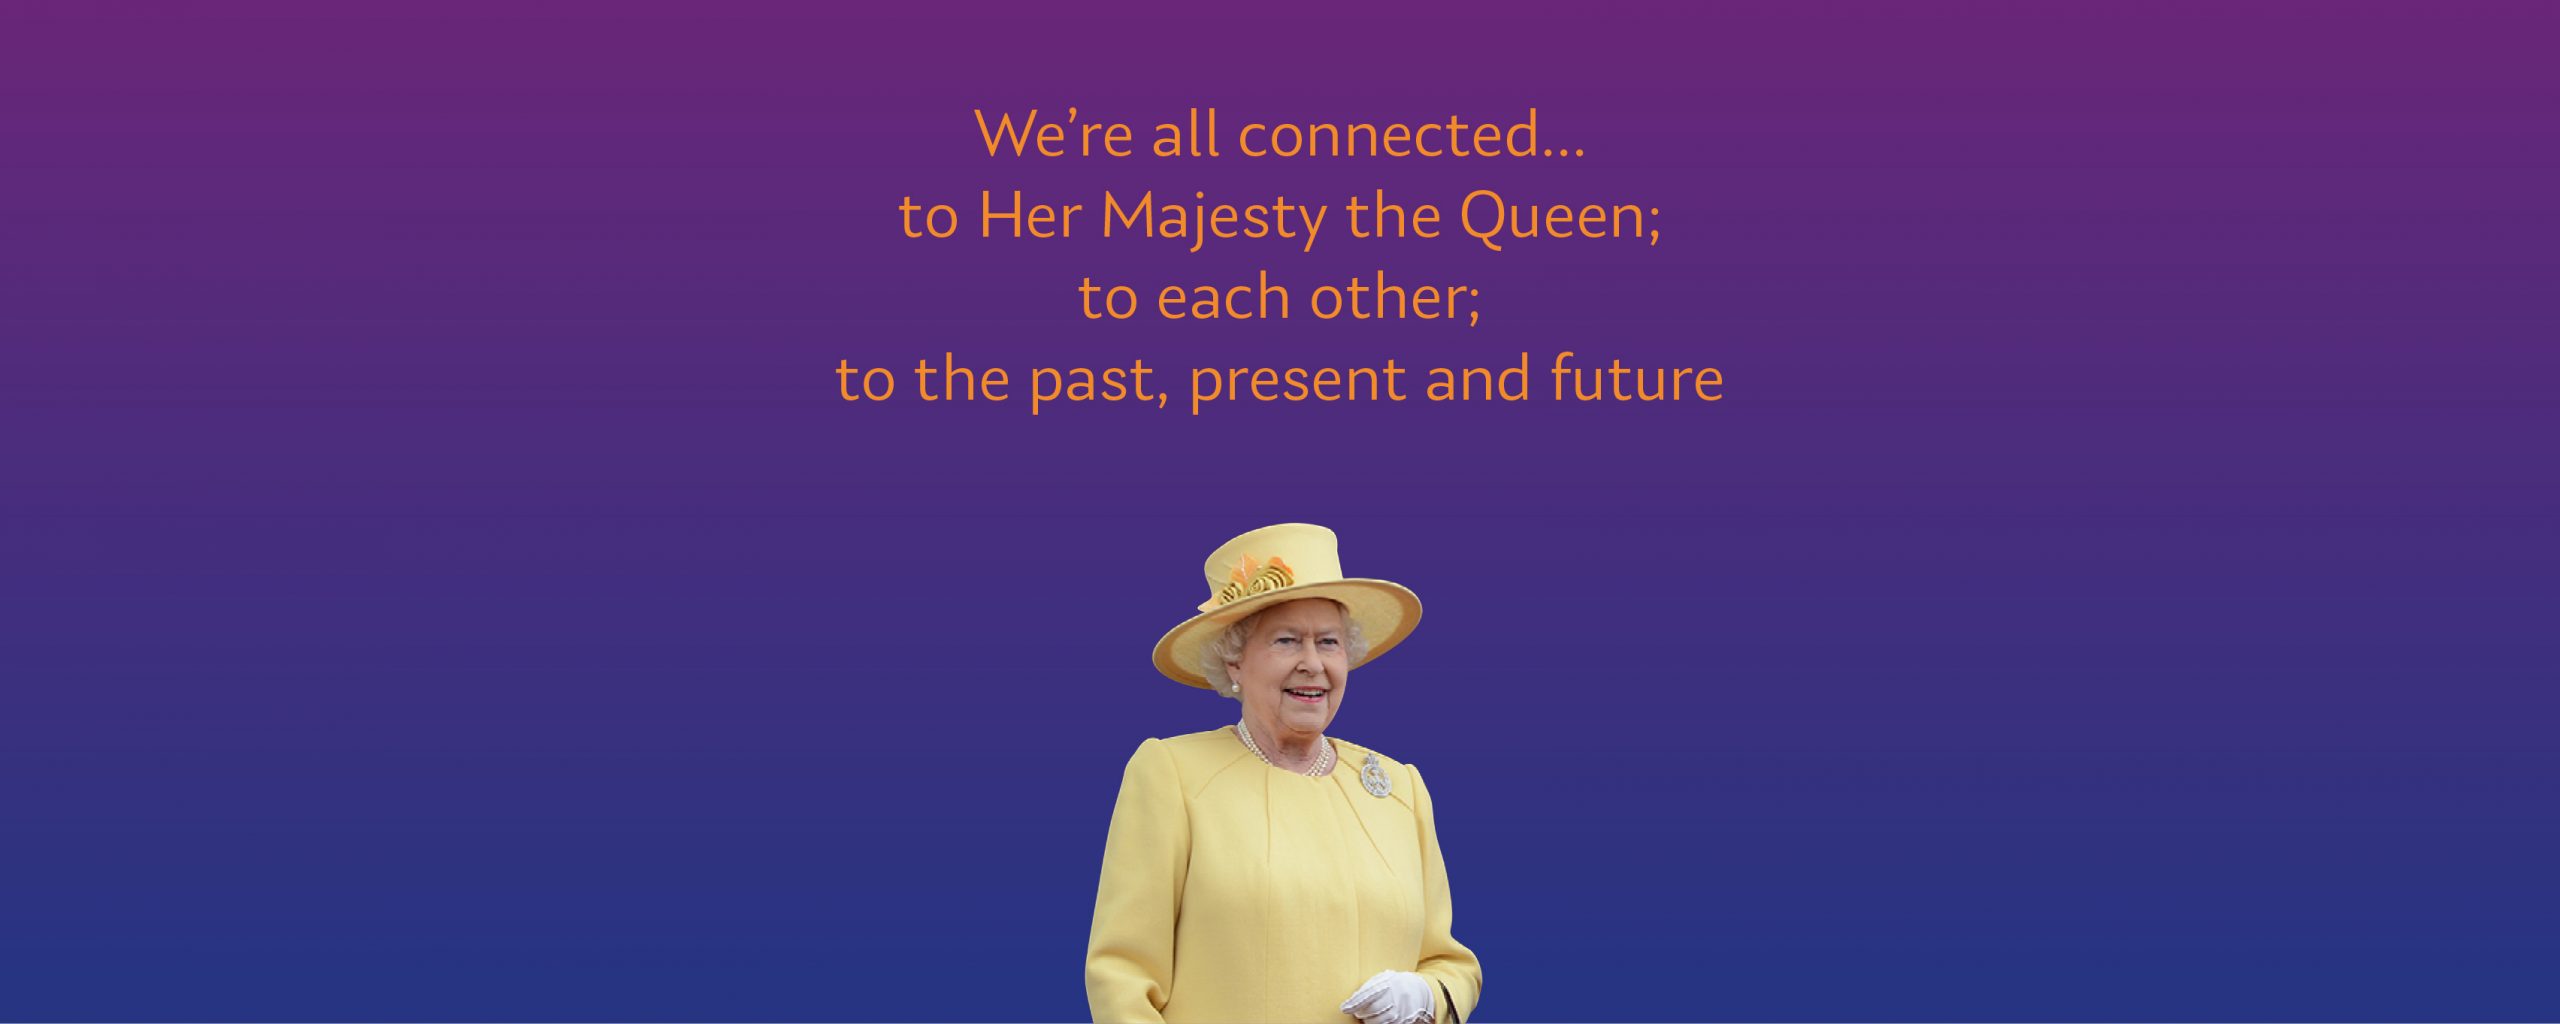 We're all connected; to Her Majesty the Queen; to each other; to the past, present and future